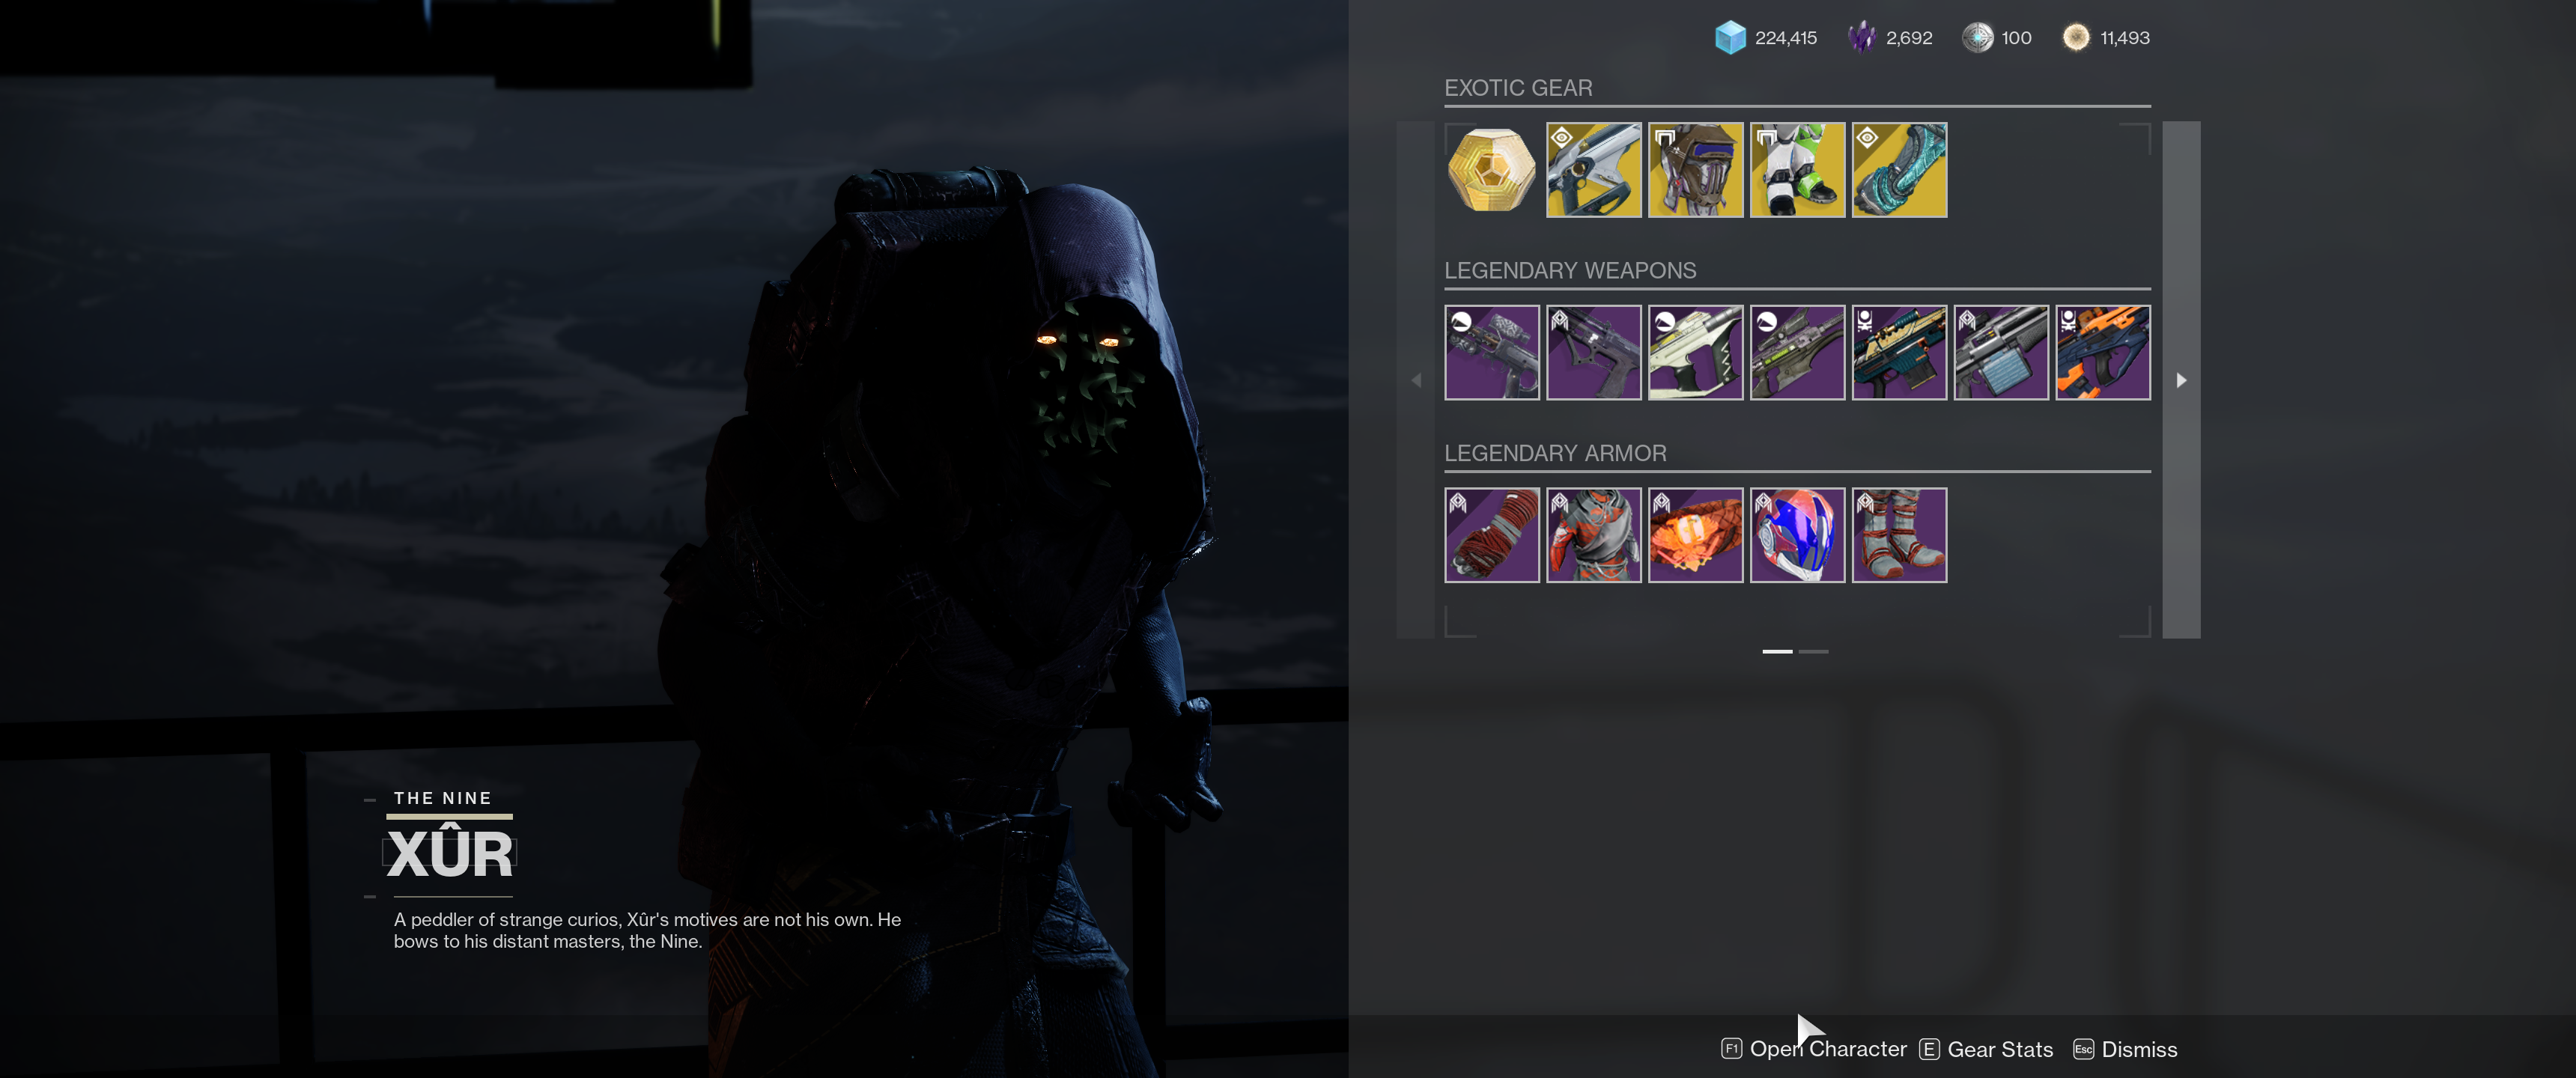 Xur inventory and recommendations.